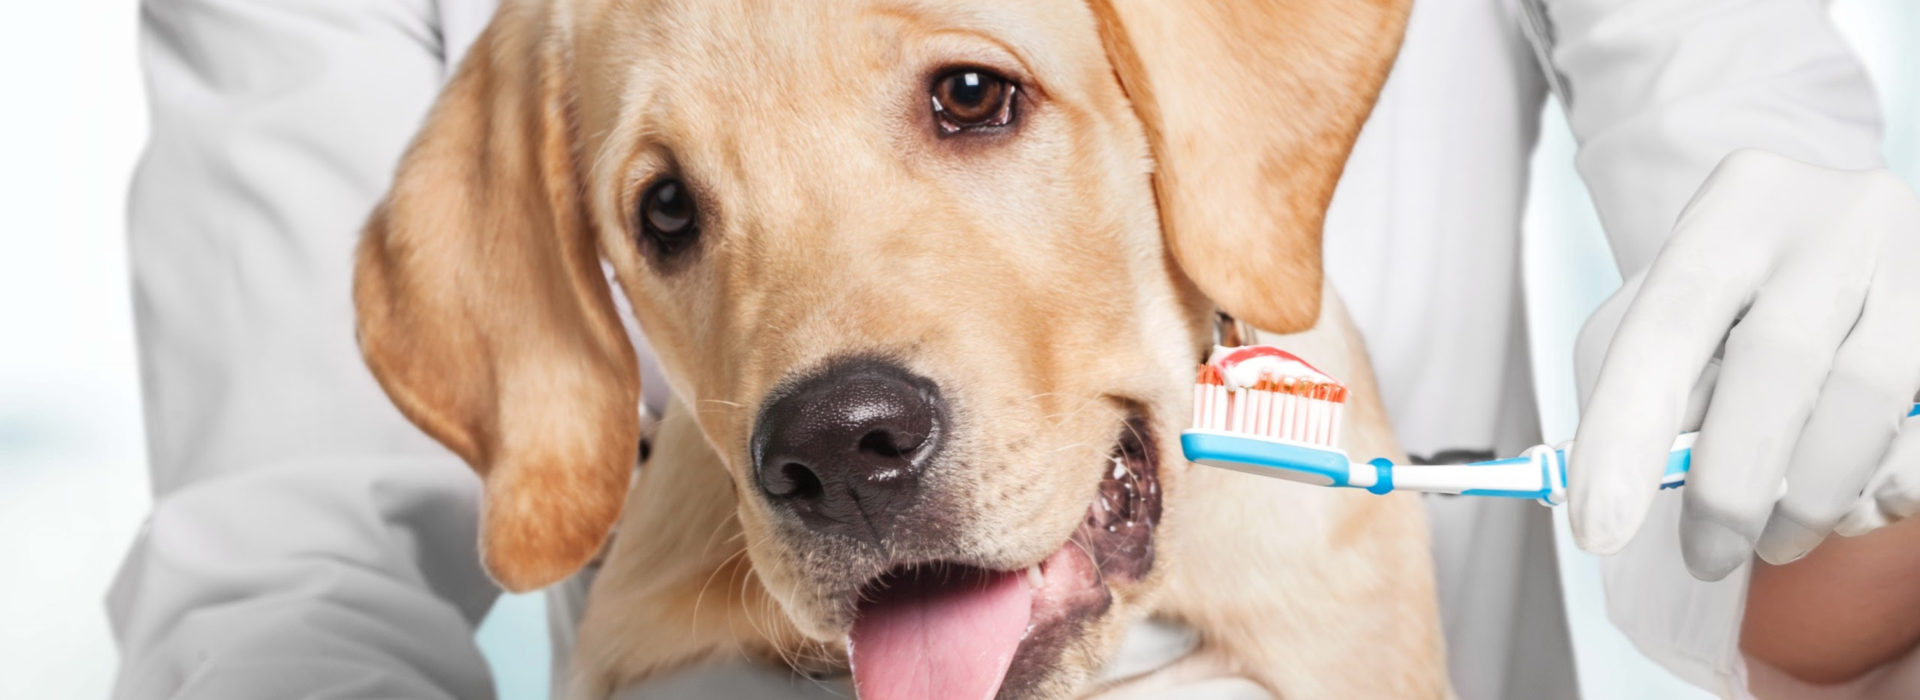 Dog and veterinarian holding a toothbrush